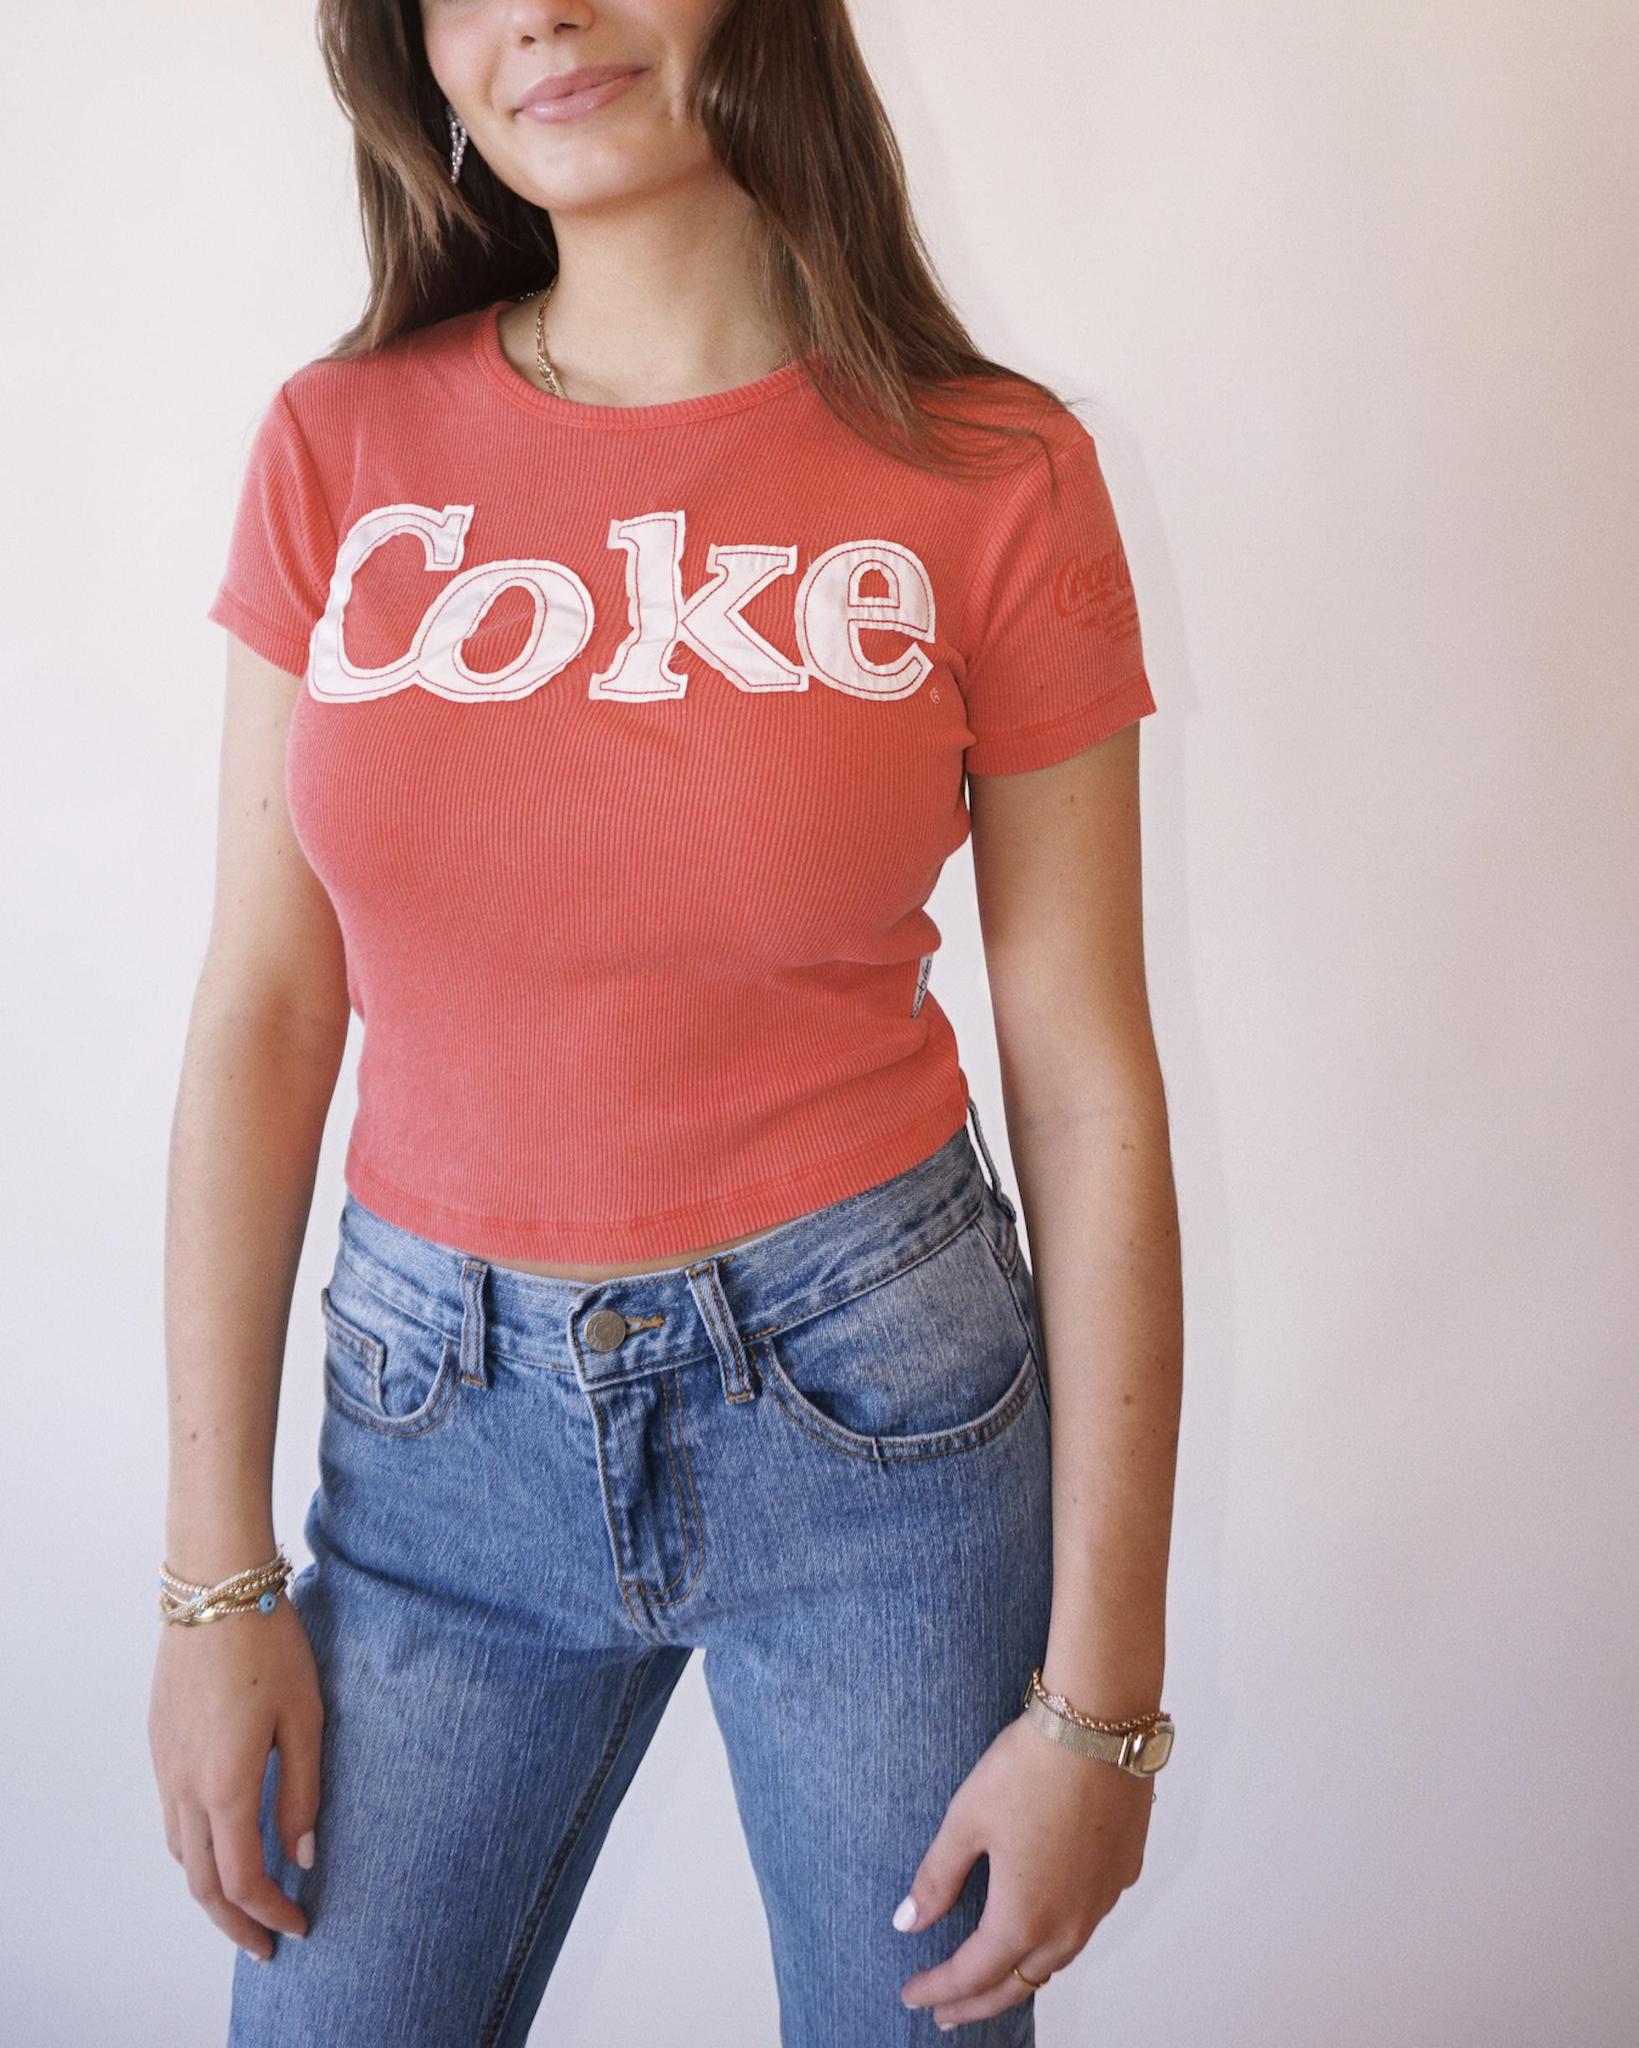 The Laundry Room Coca Cola Patchwork Ribbed Tee